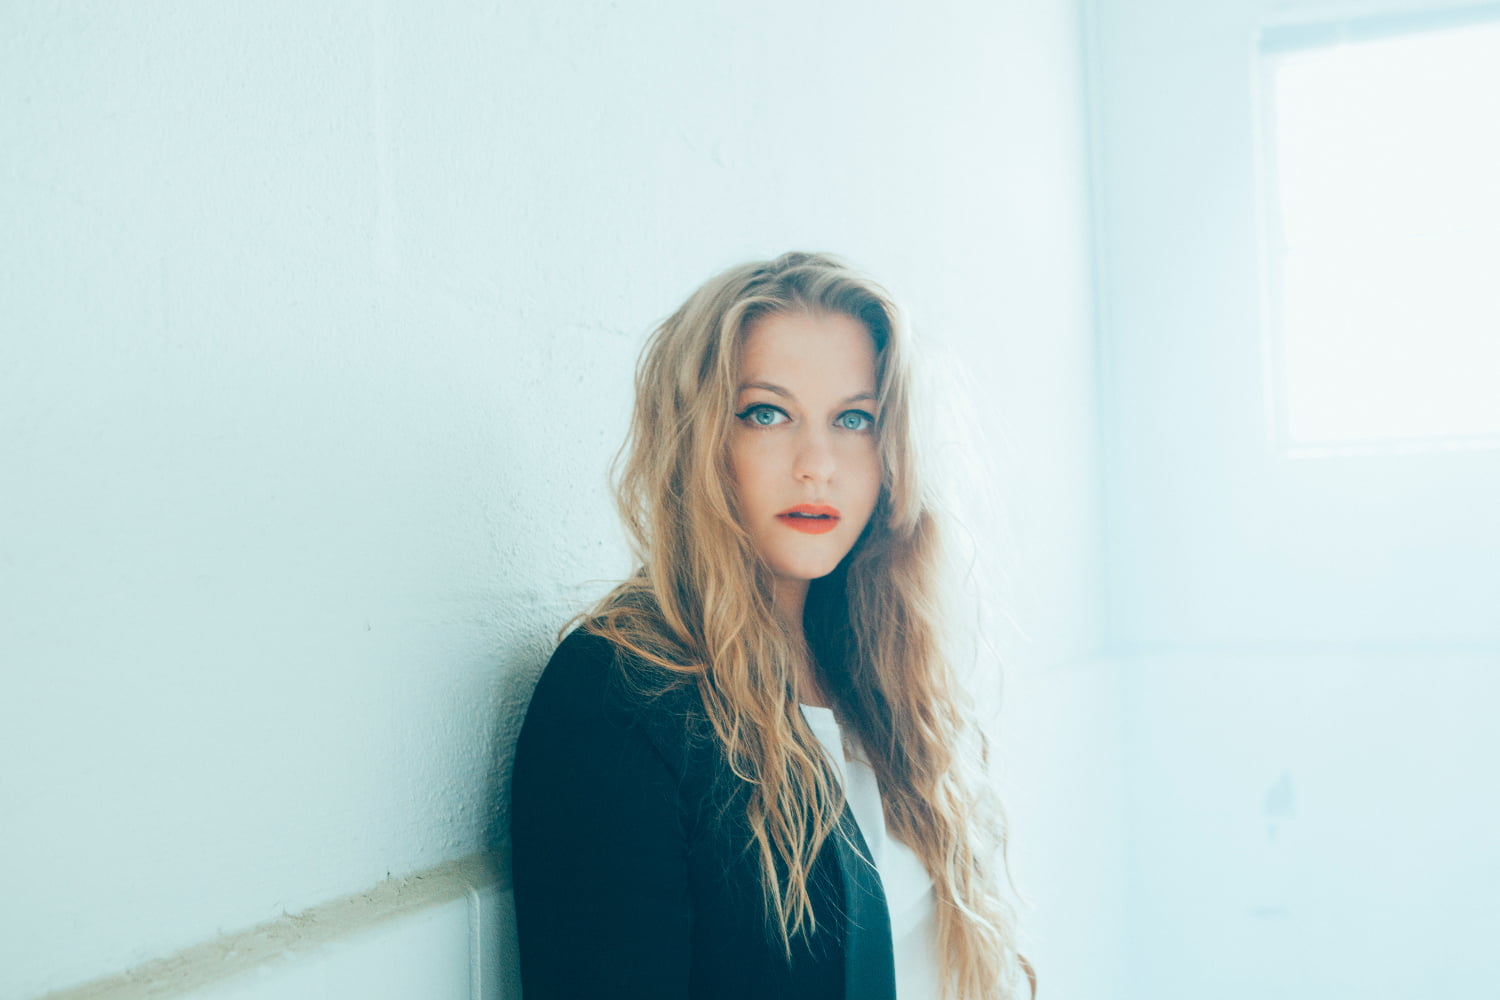 Jo Harman (full band show) plus support, Emrys the Brave